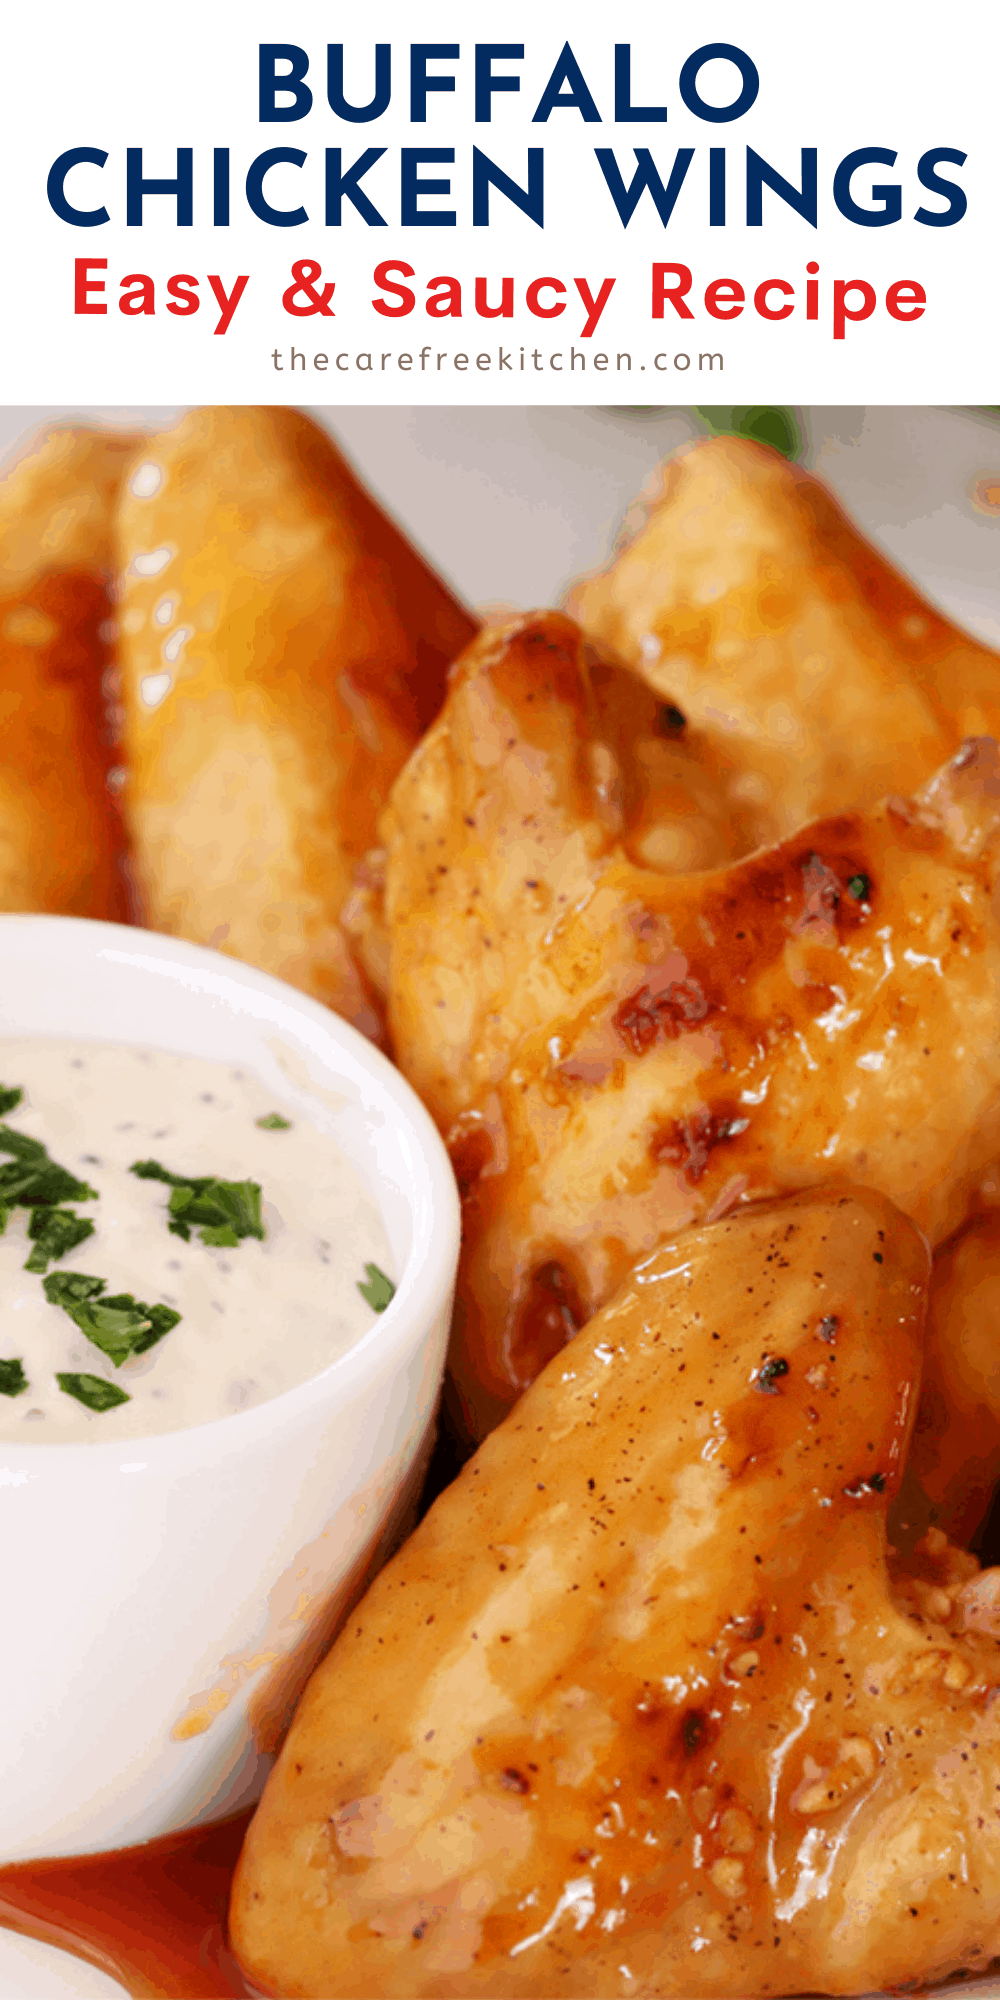 Pinterest pin for Oven-Baked Buffalo Chicken Wings.